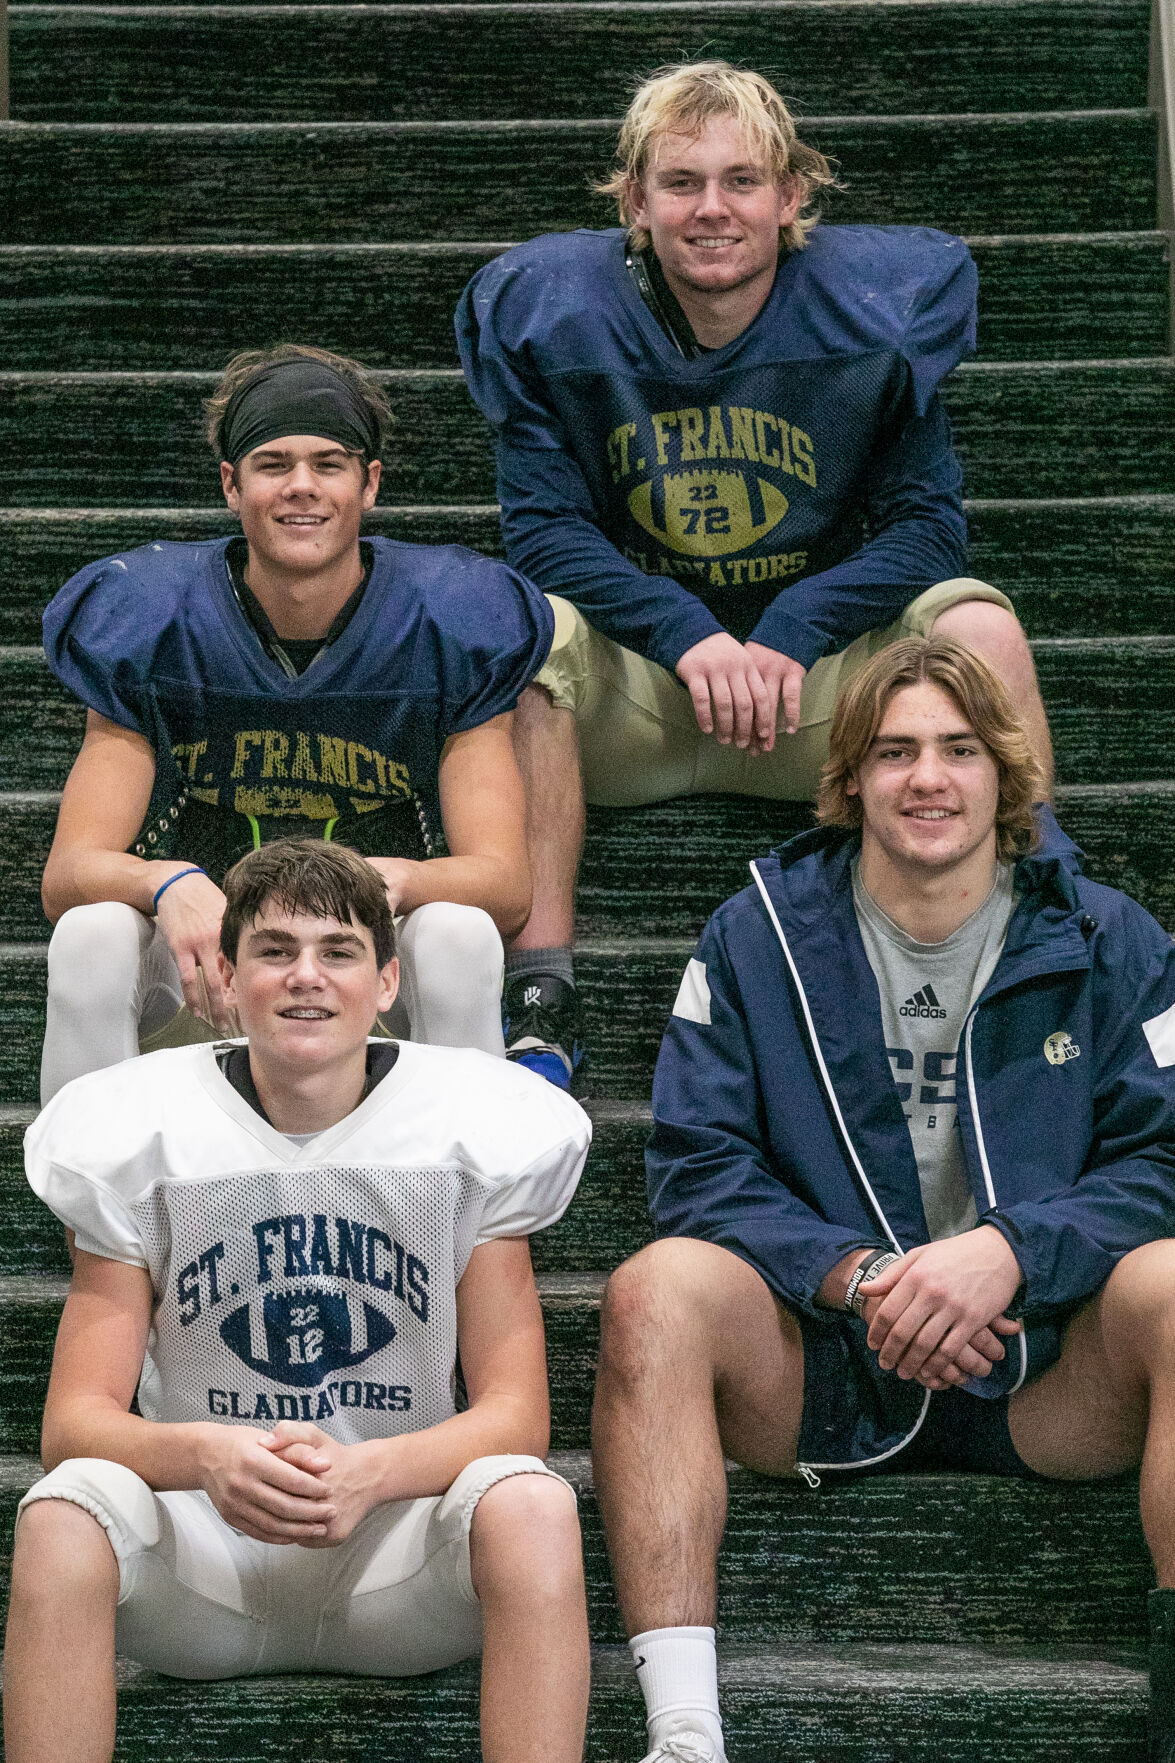 Glad hand-me-down: Traverse City St. Francis players aim for multi